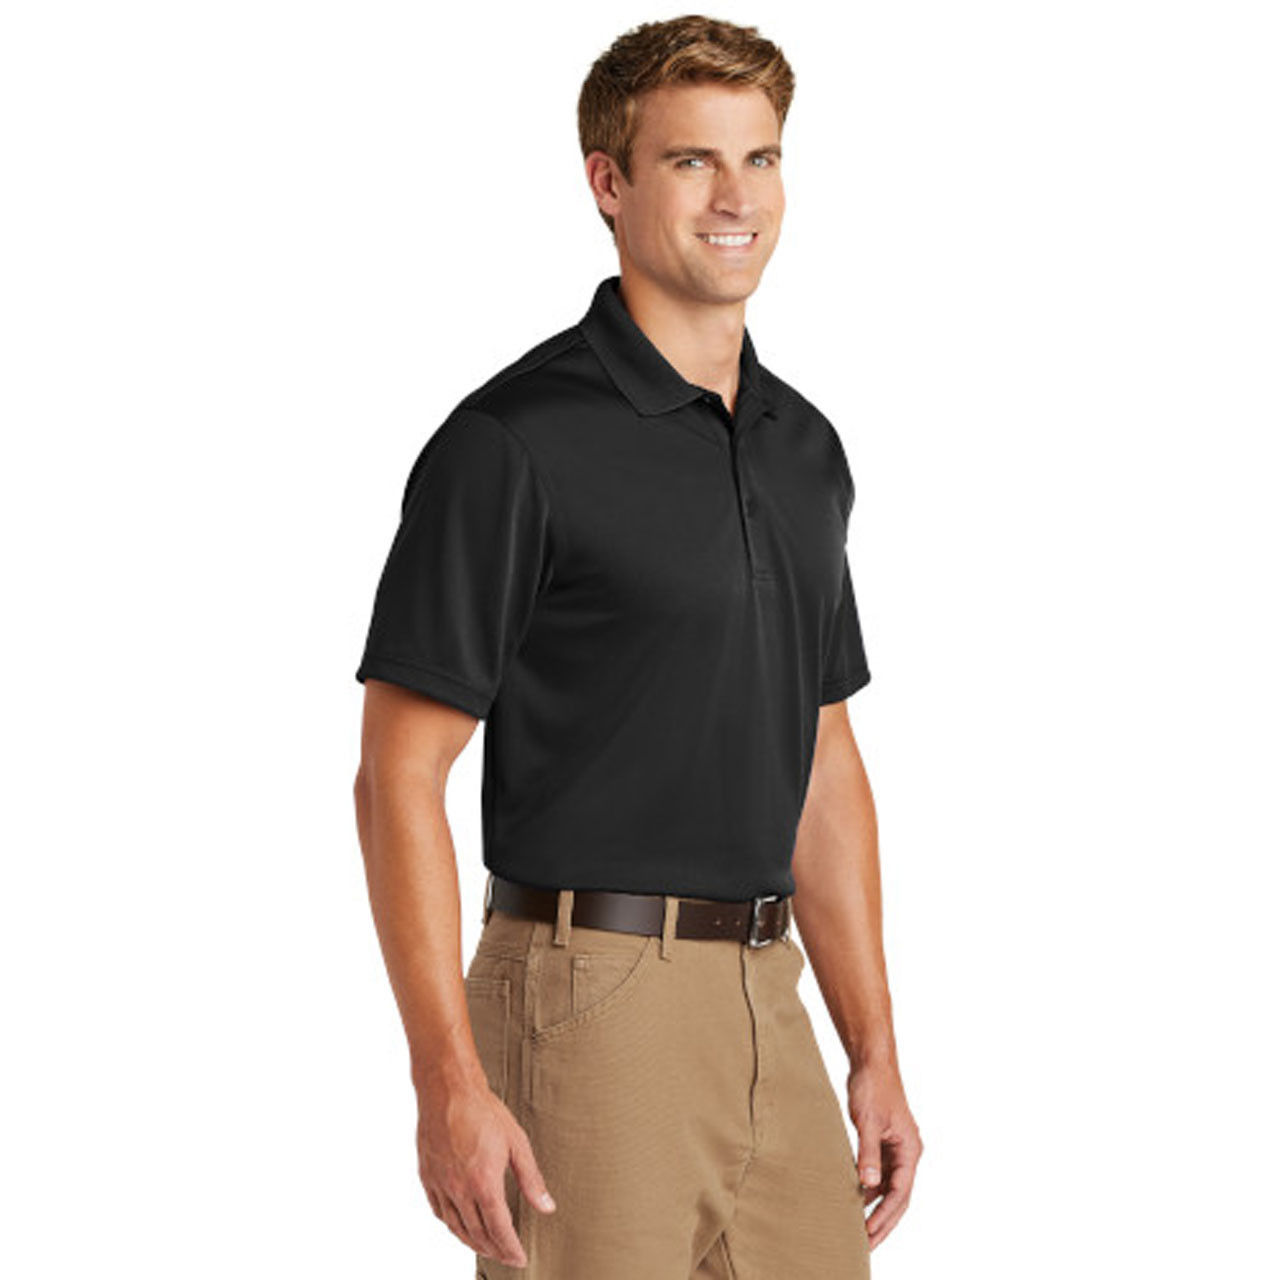 What is the material of the men's black polo shirt?